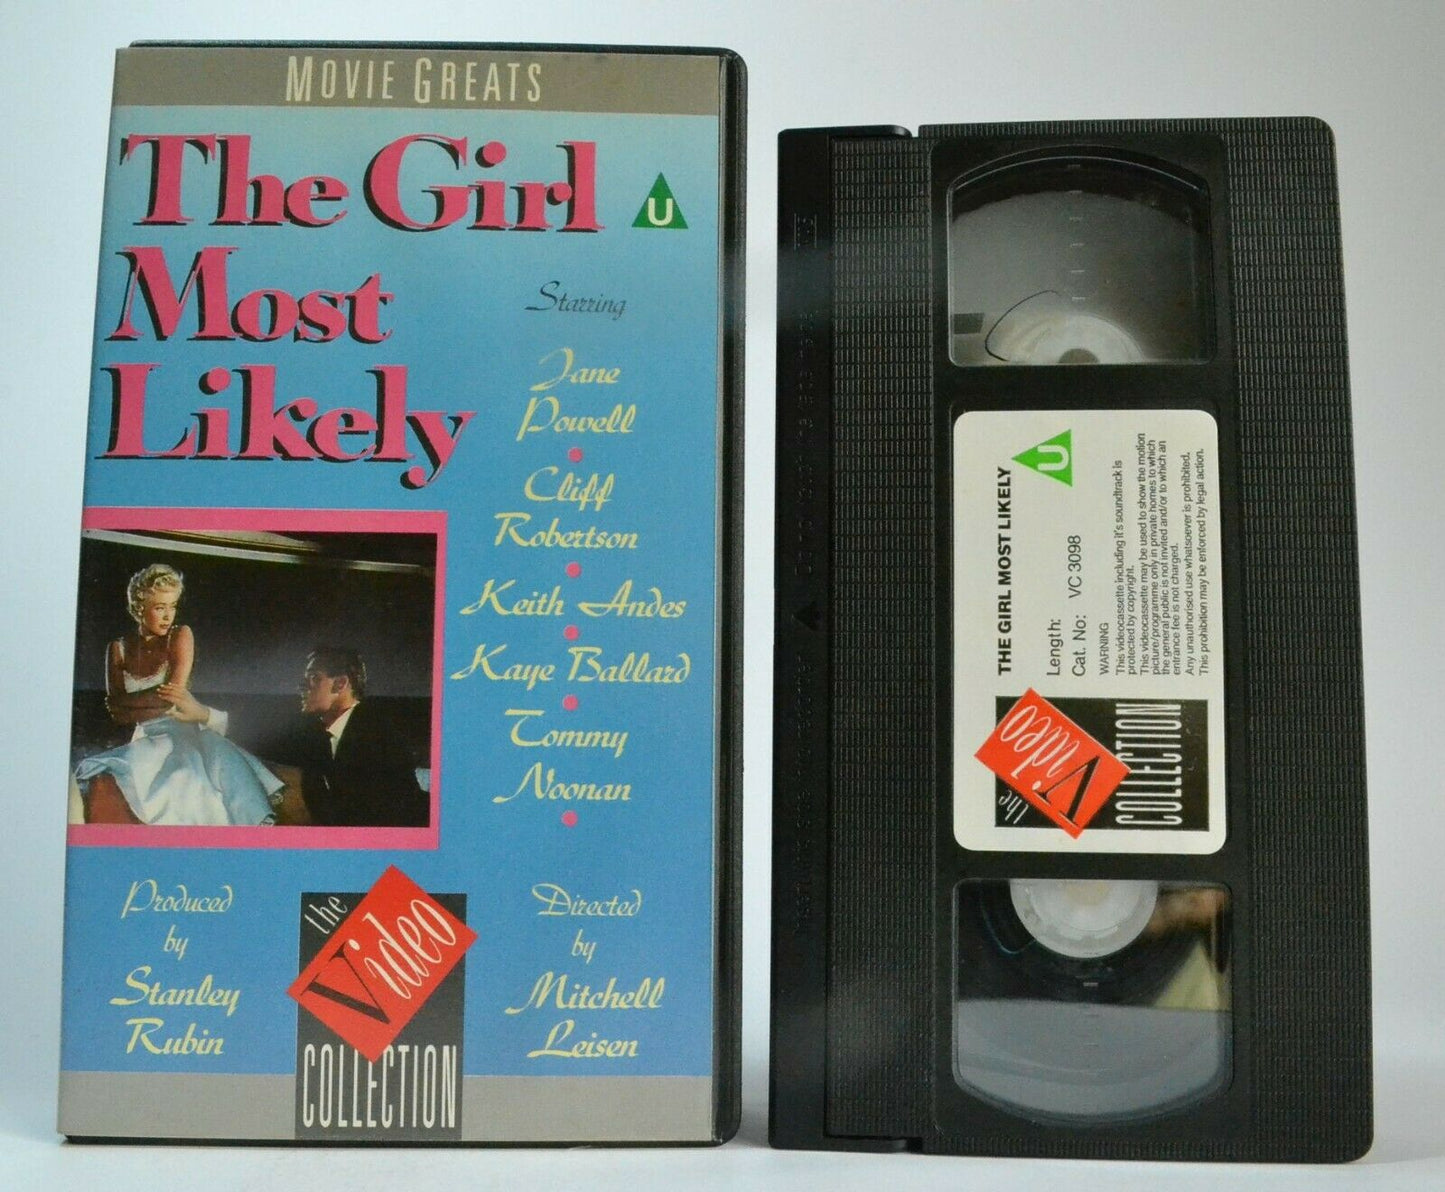 The Girl Most Likely (1958): Musical Comedy - Jane Powell/Cliff Robertson - VHS-